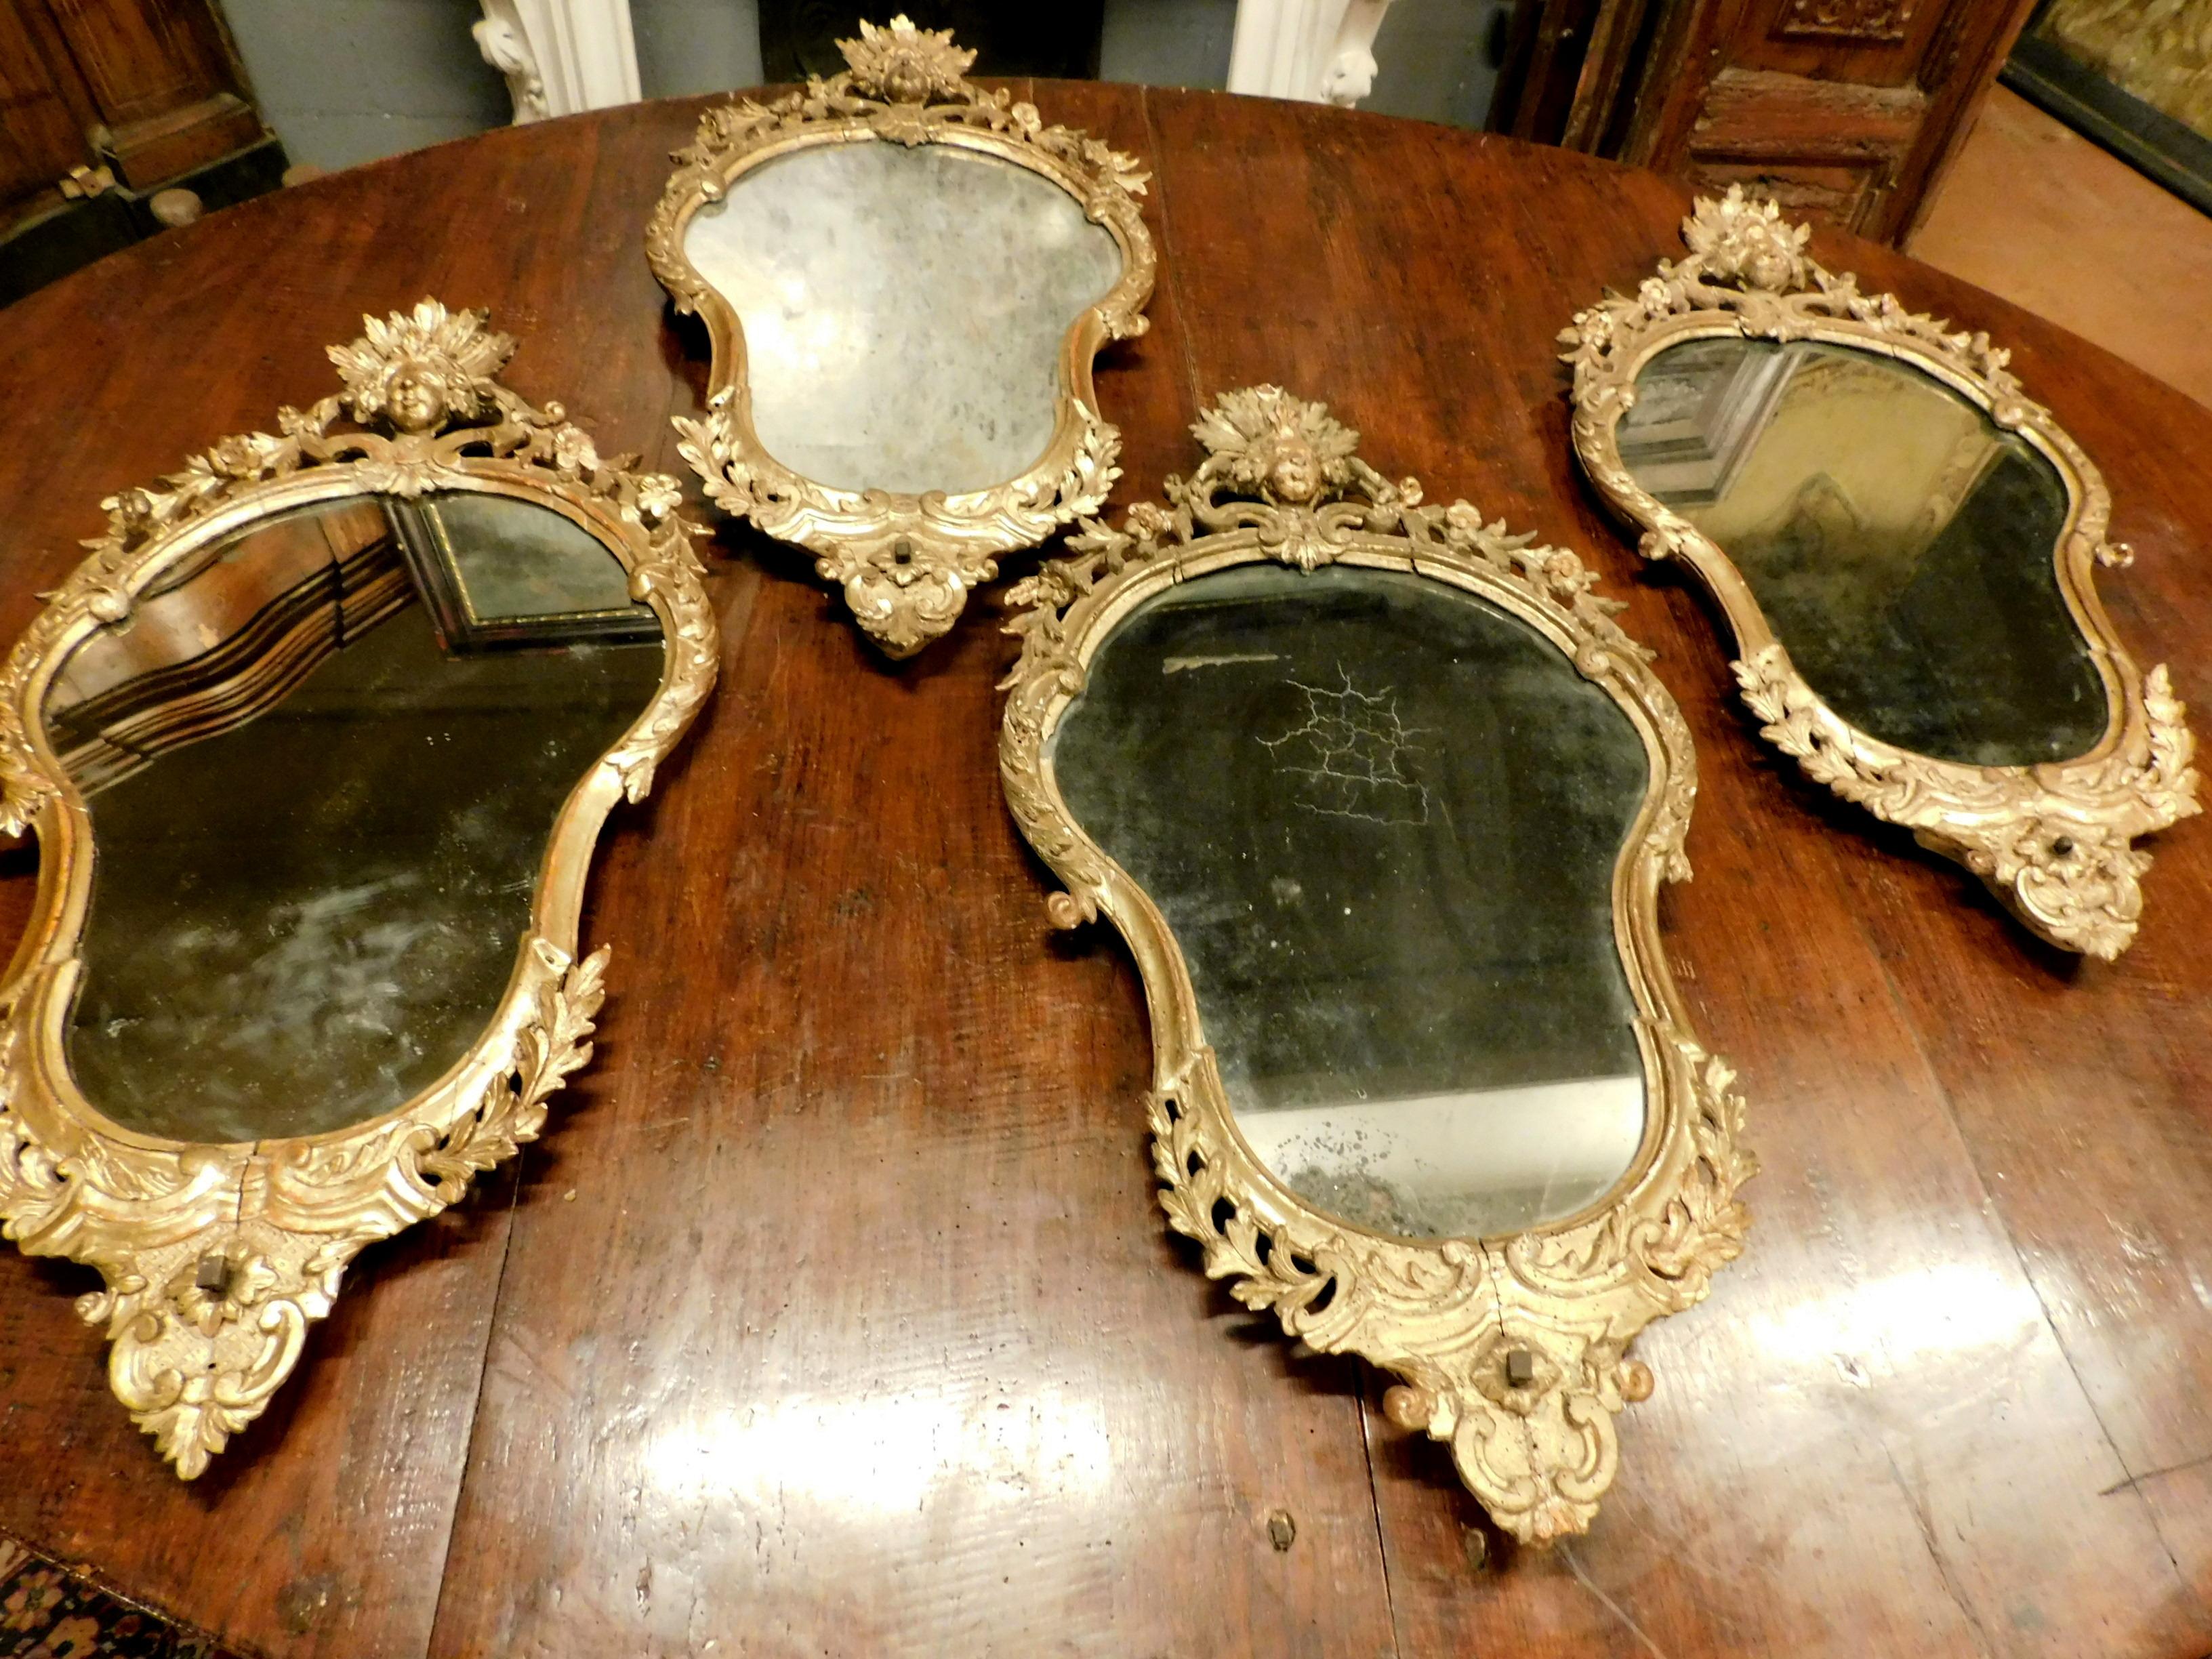 Gilt Set of 4 Antique Gilded Mirrors, 18th Century Italy